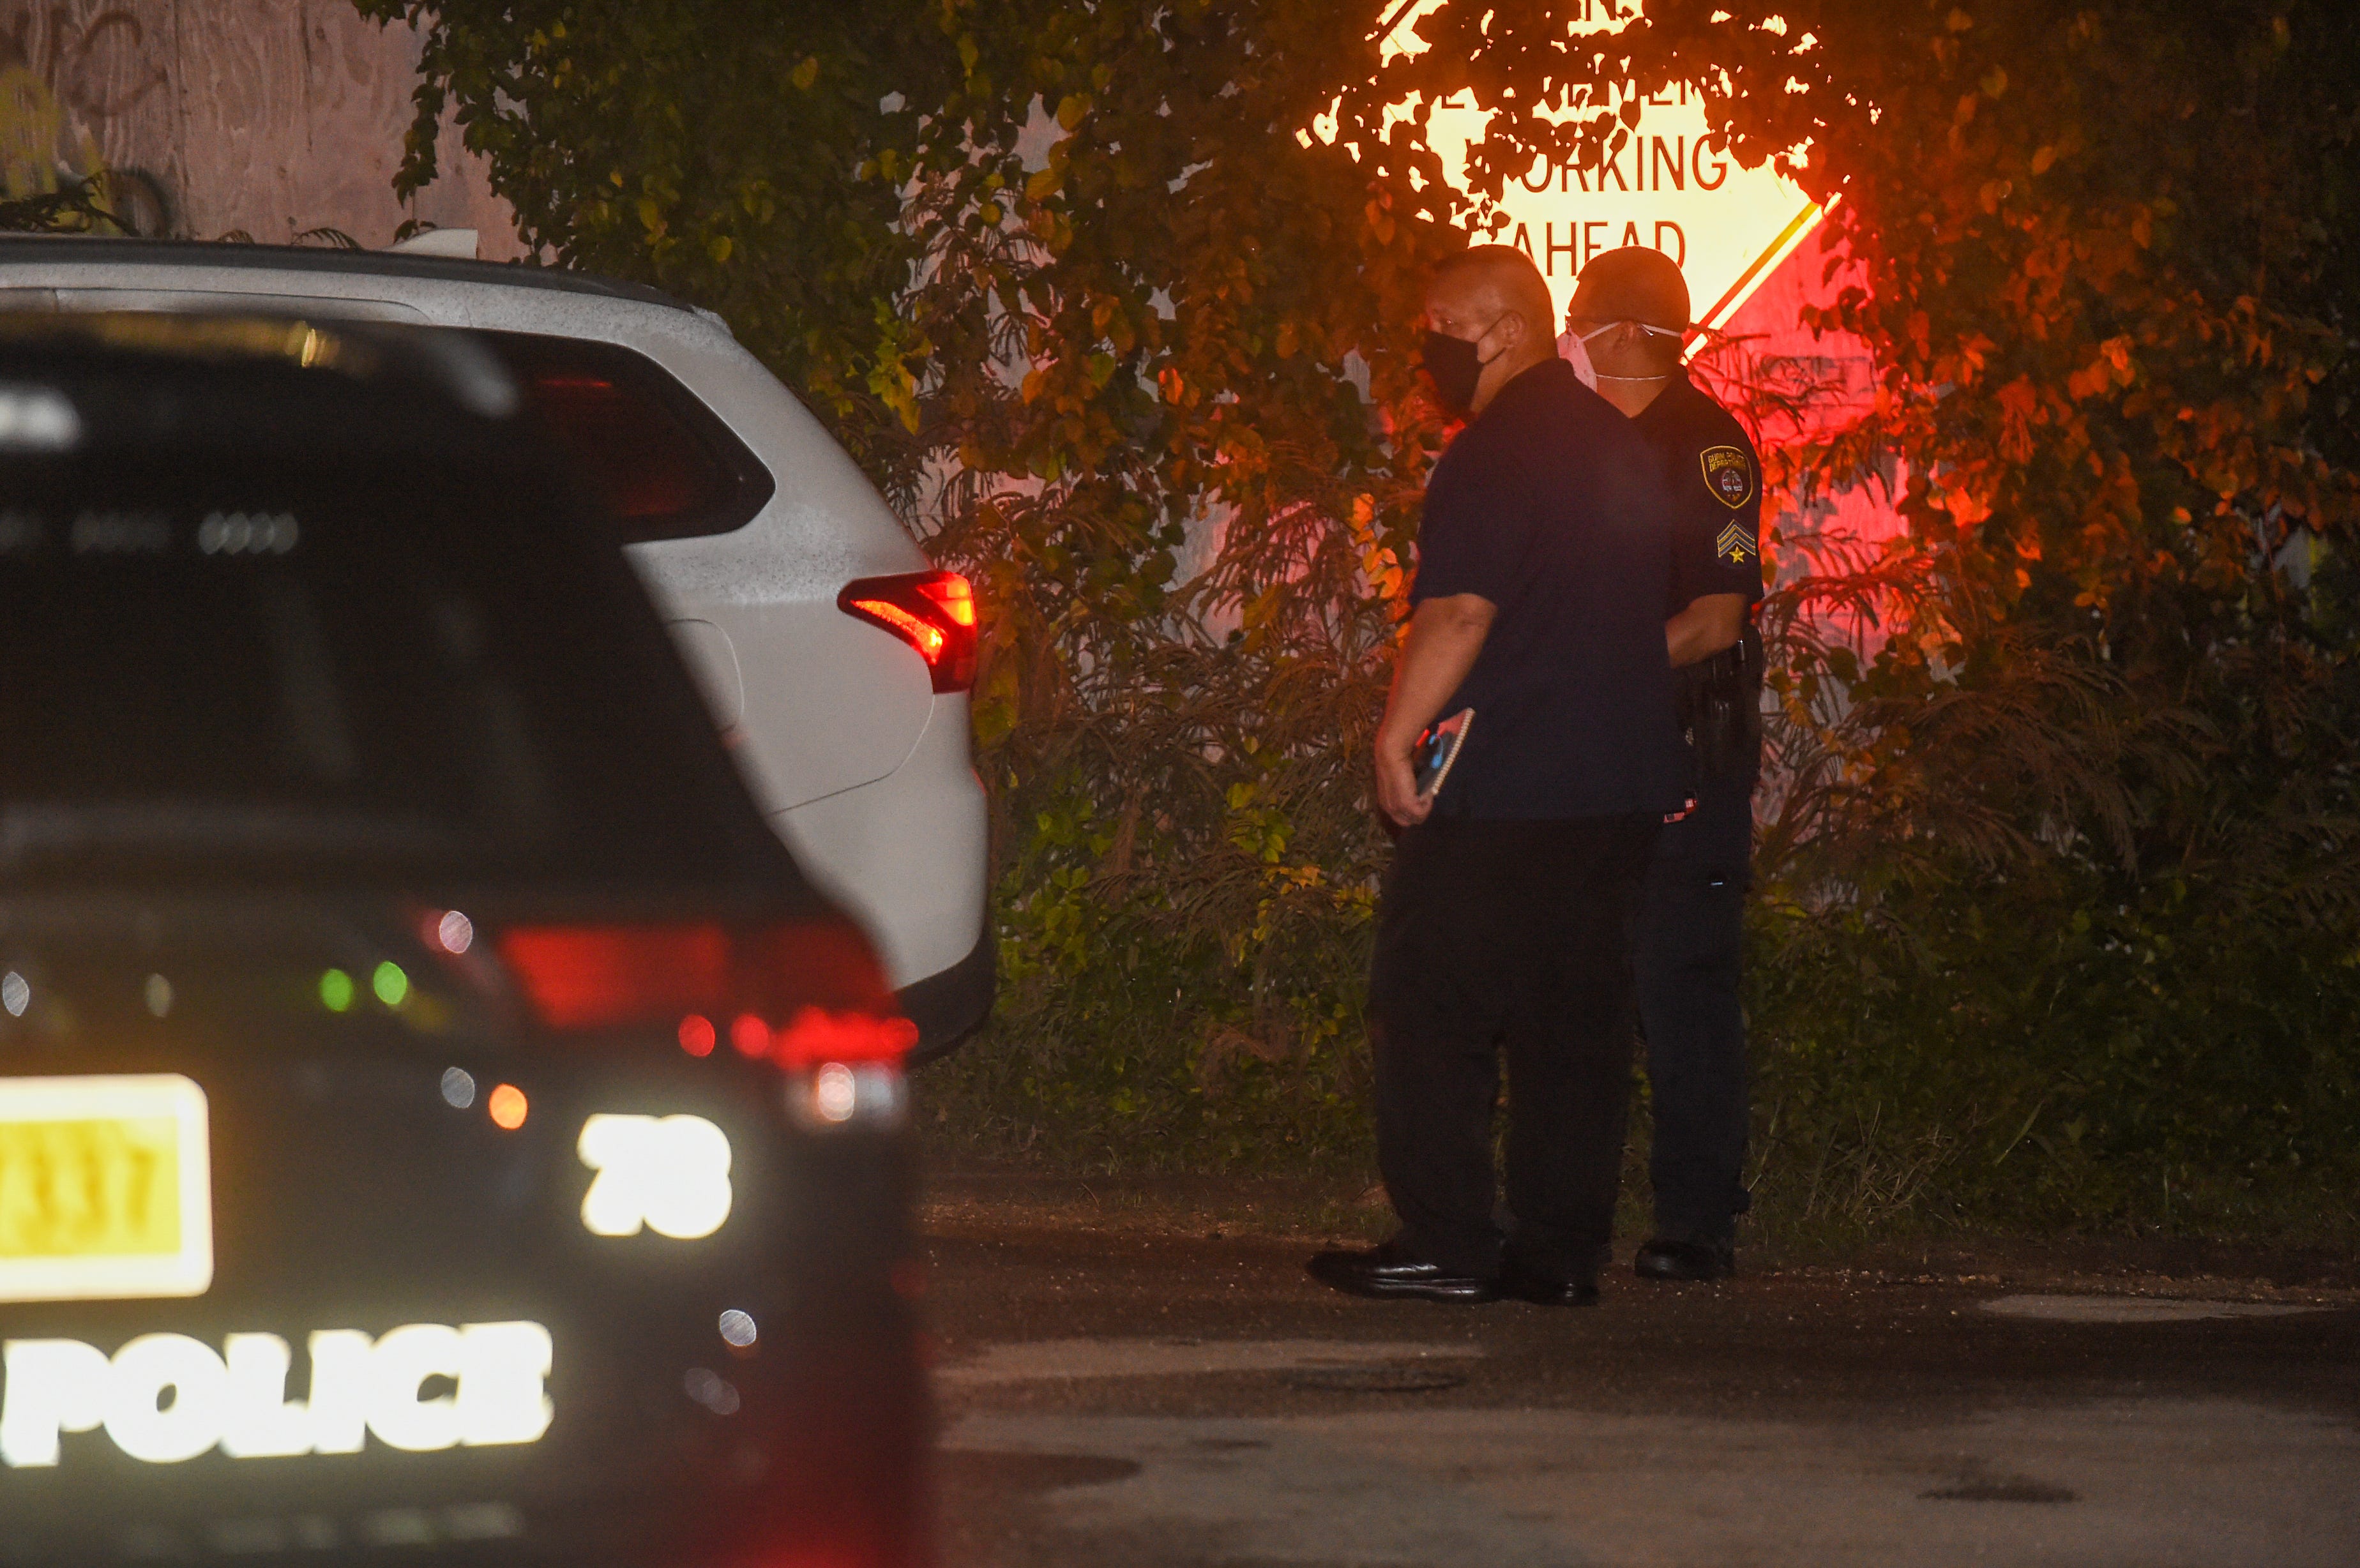 Guam Police Department officers convene at scene of an officer-involved shooting on Bonito Street in Tamuning, Nov. 4, 2020.